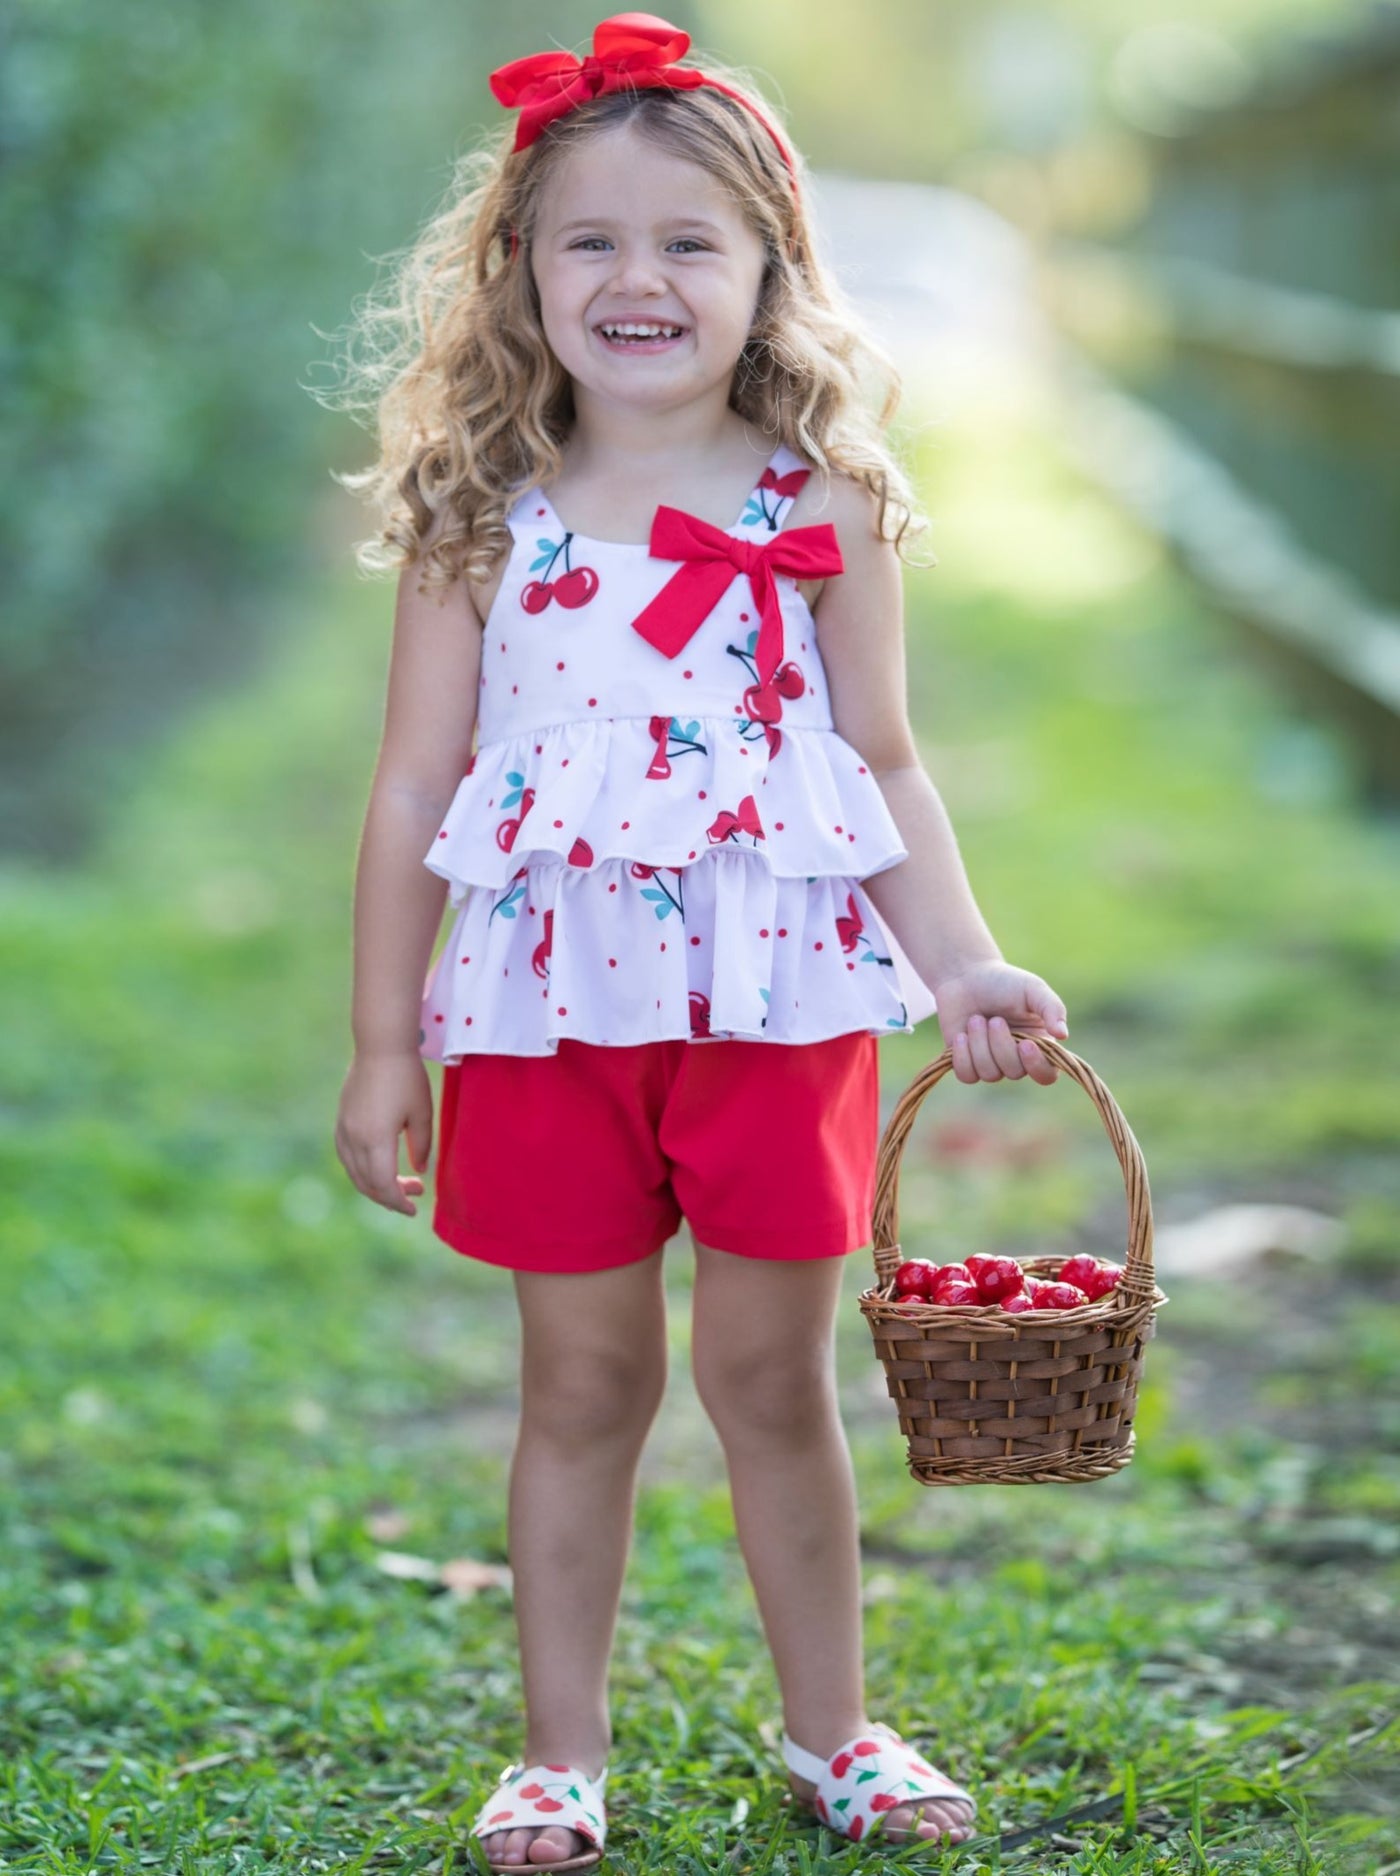 Girls Cherry Ruffled Top With Cute Stretchy Shorts - Red / 2T - Girls Spring Casual Set